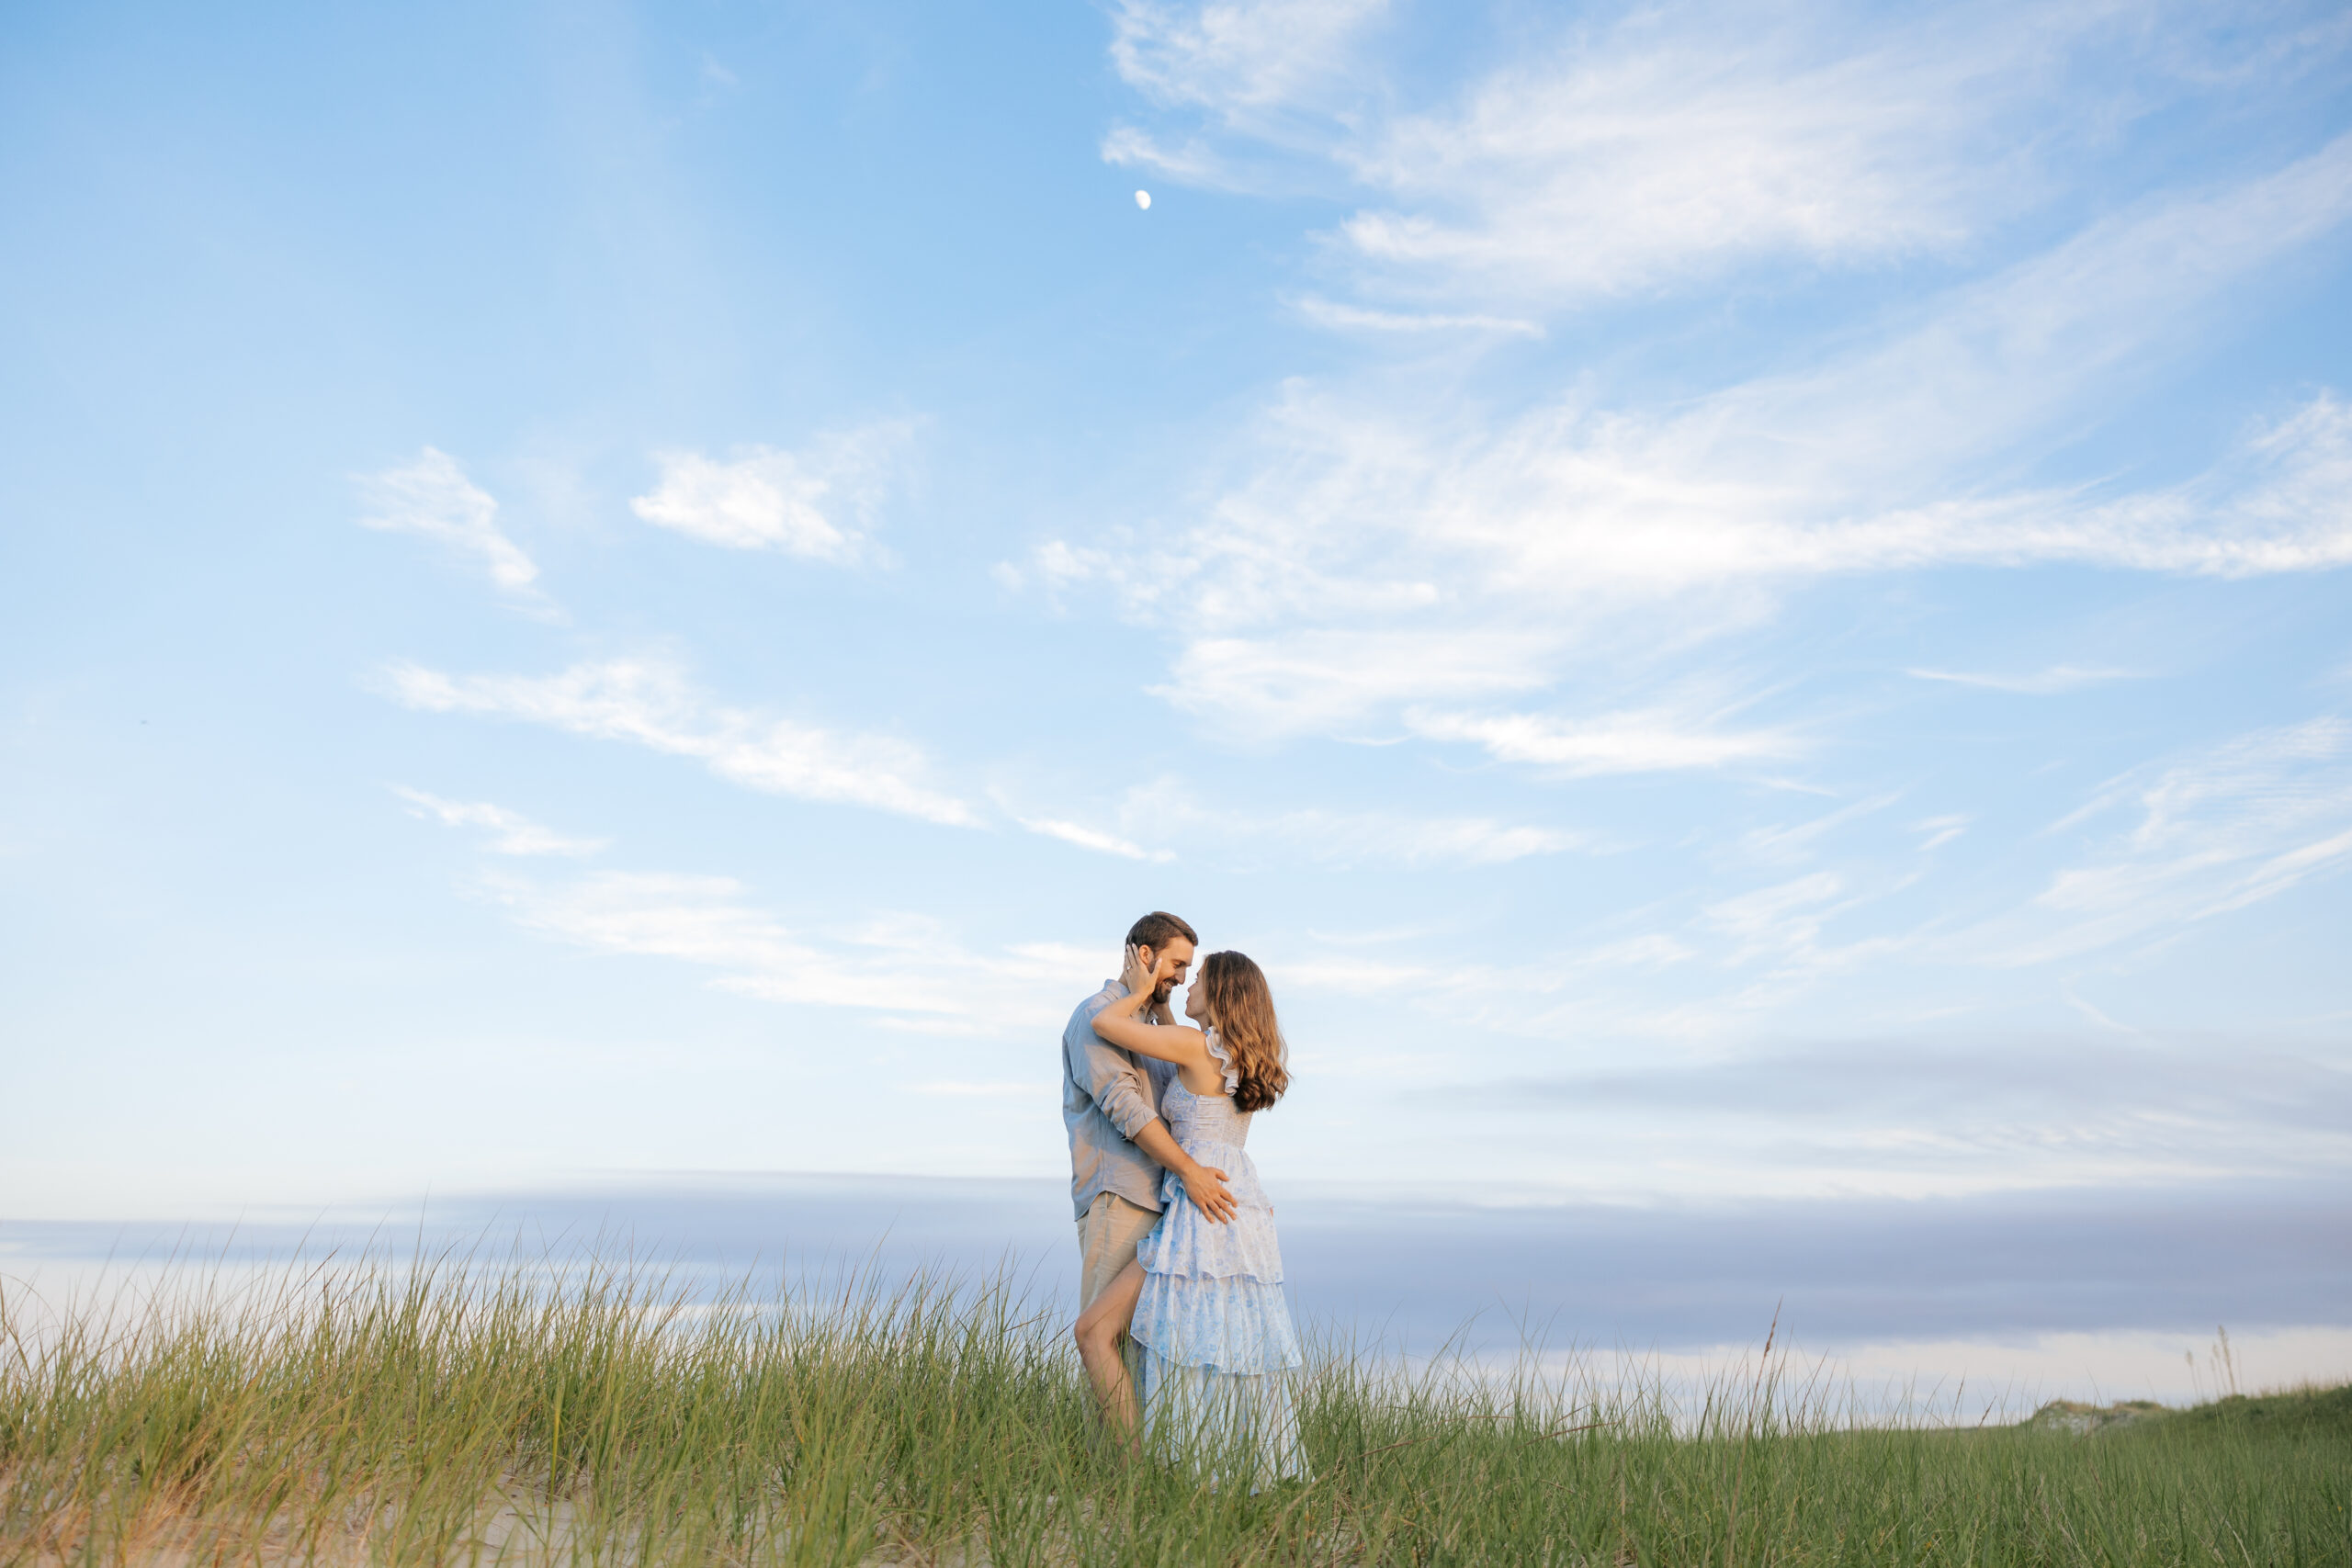 Timeless portrait of engaged couple gazing into each other's eyes on sandy beach in New Jersey